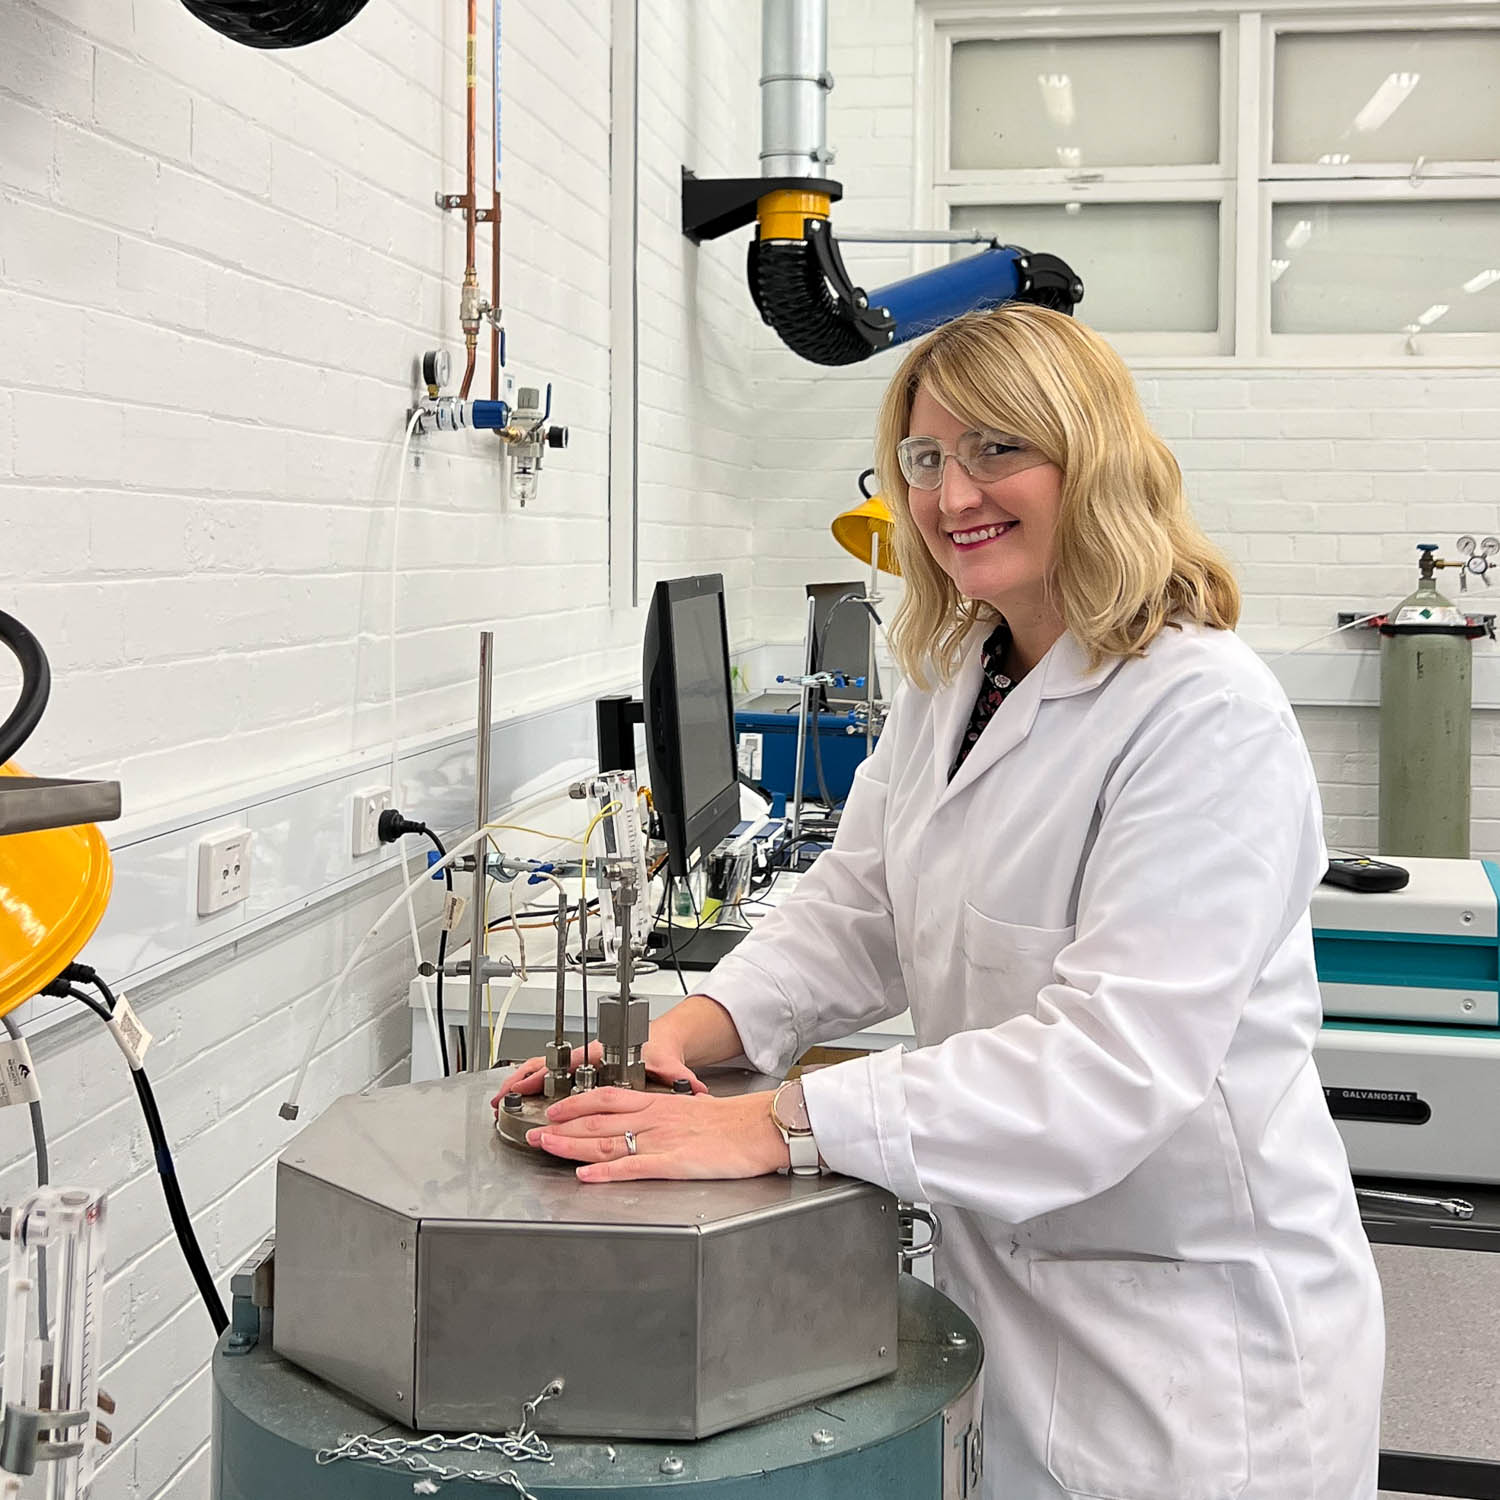 researcher, Dr Jessica Allen, stands in her lab wearing a white lab jacket holding science equipment smiling at the camera^empty:{ds__assetid^as_asset:asset_name}